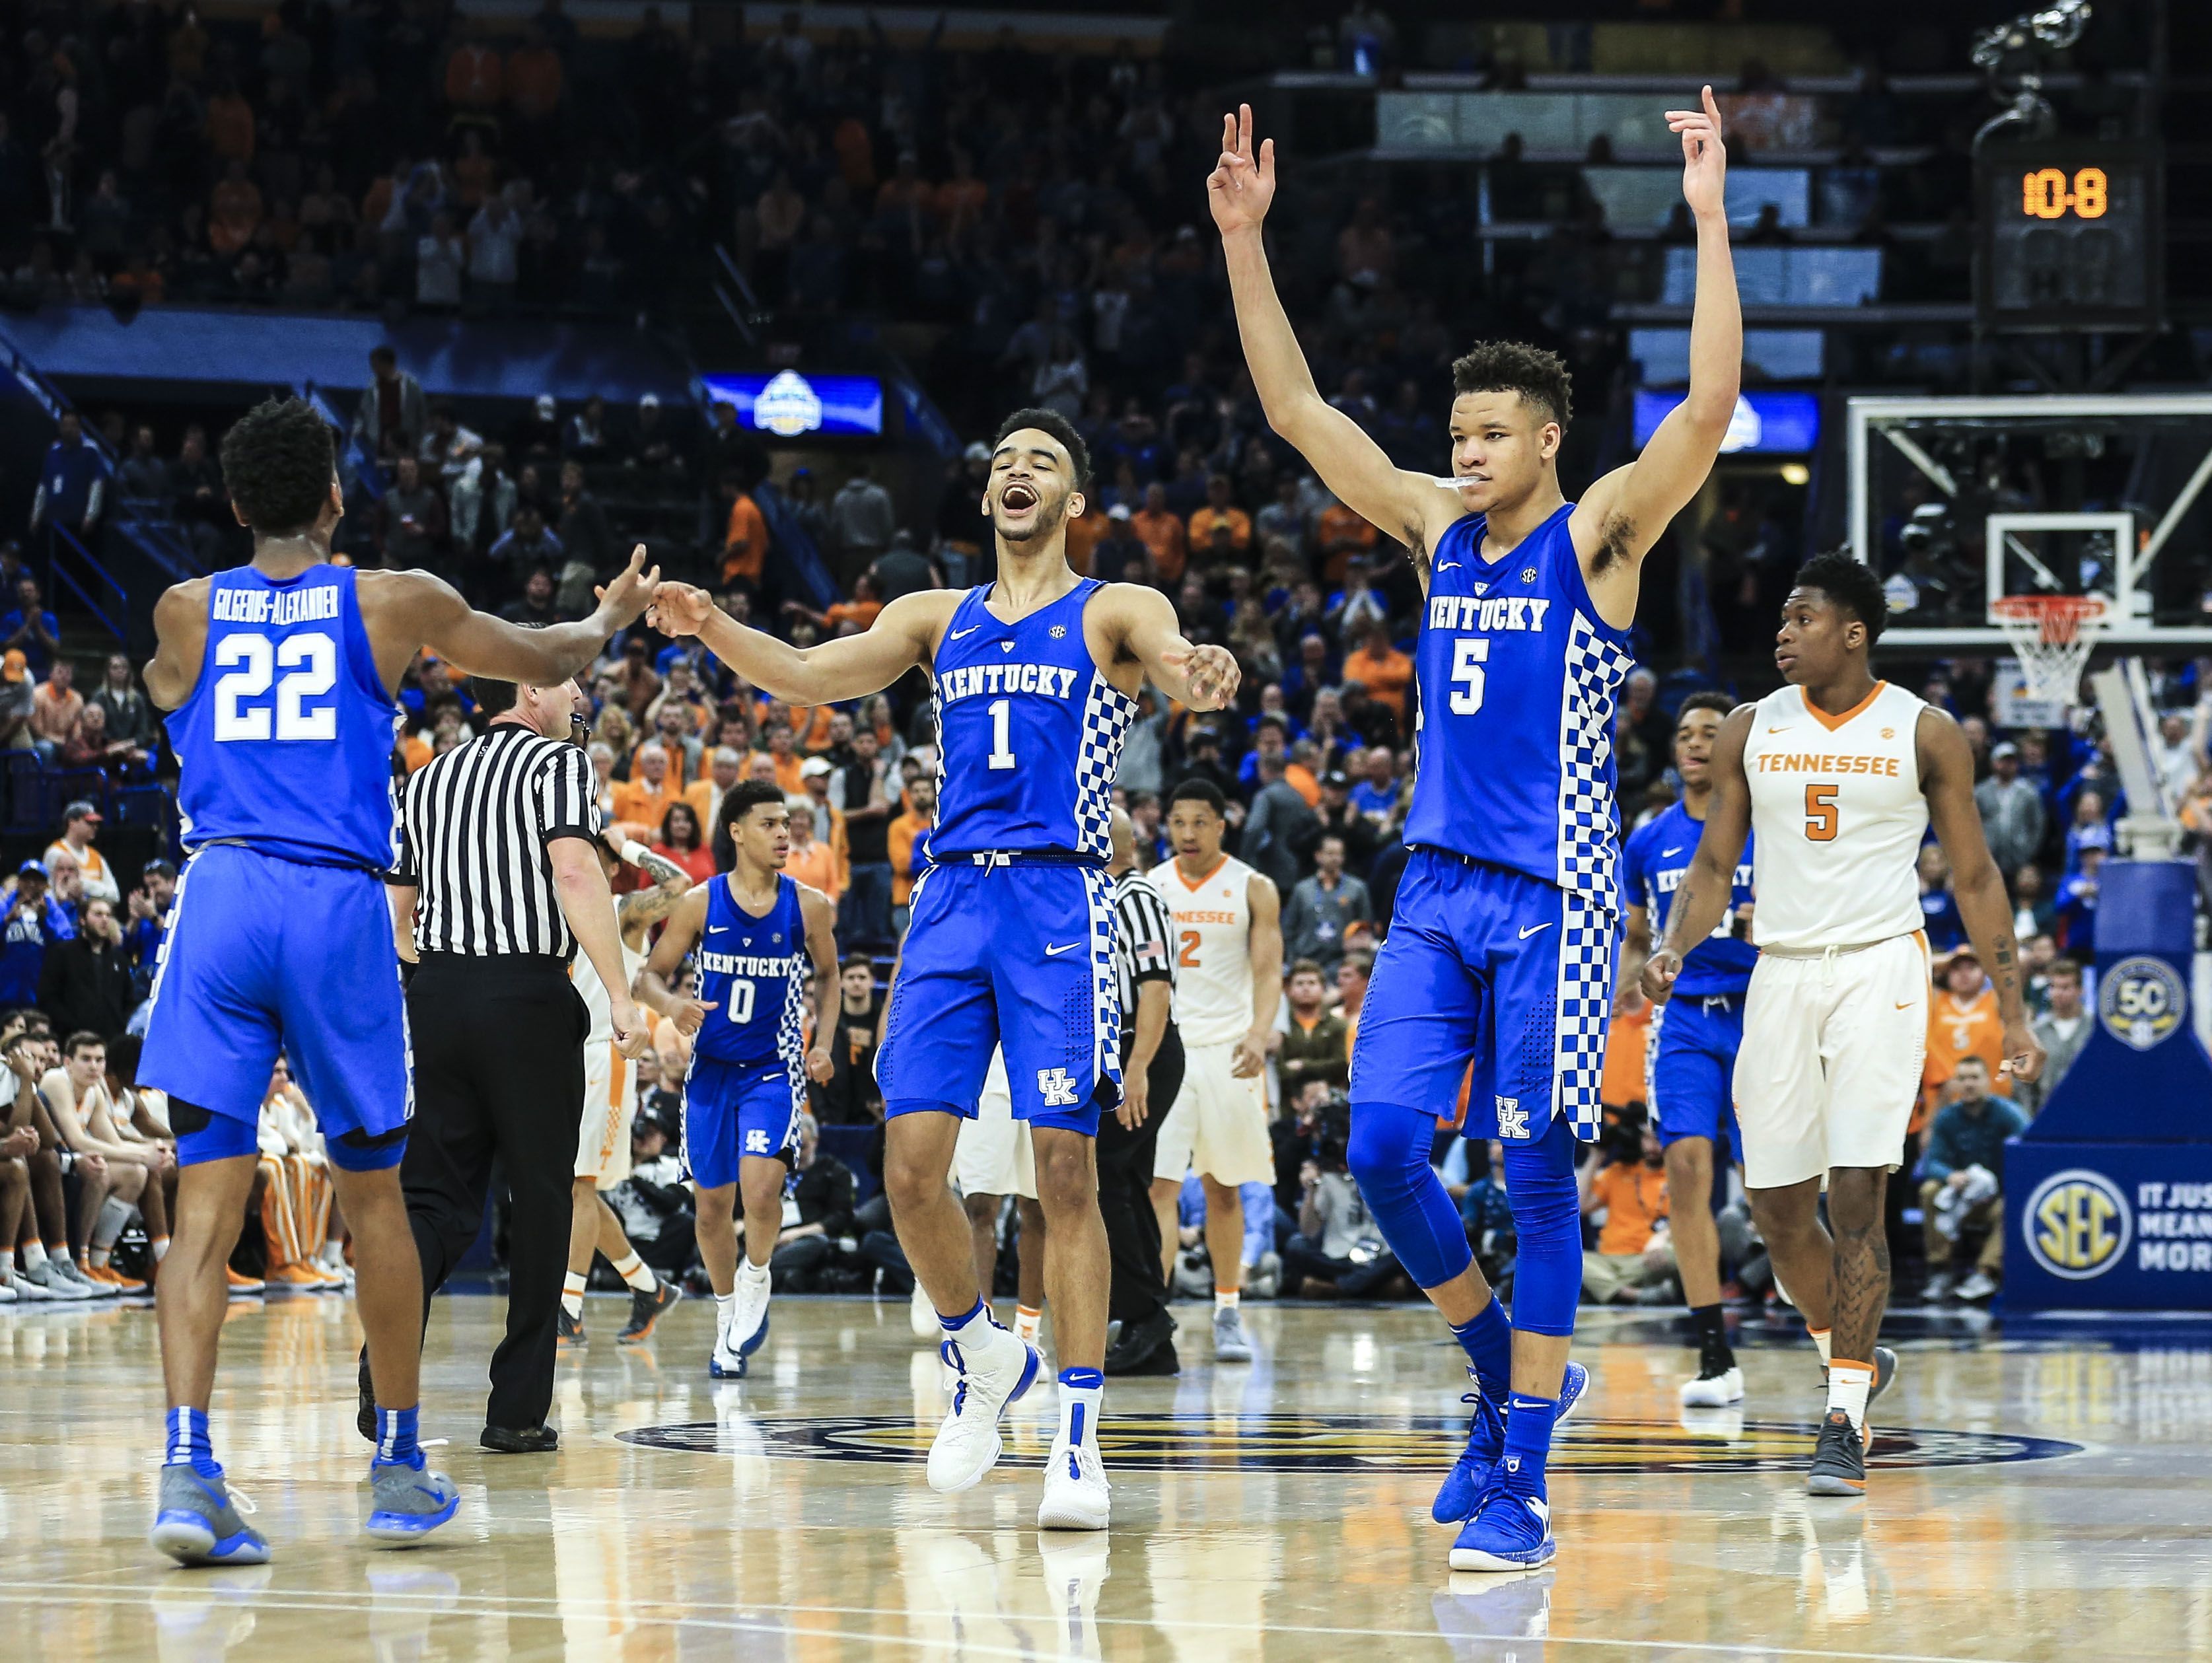 Kentucky basketball knocks out Tennessee to claim fourthstraight SEC